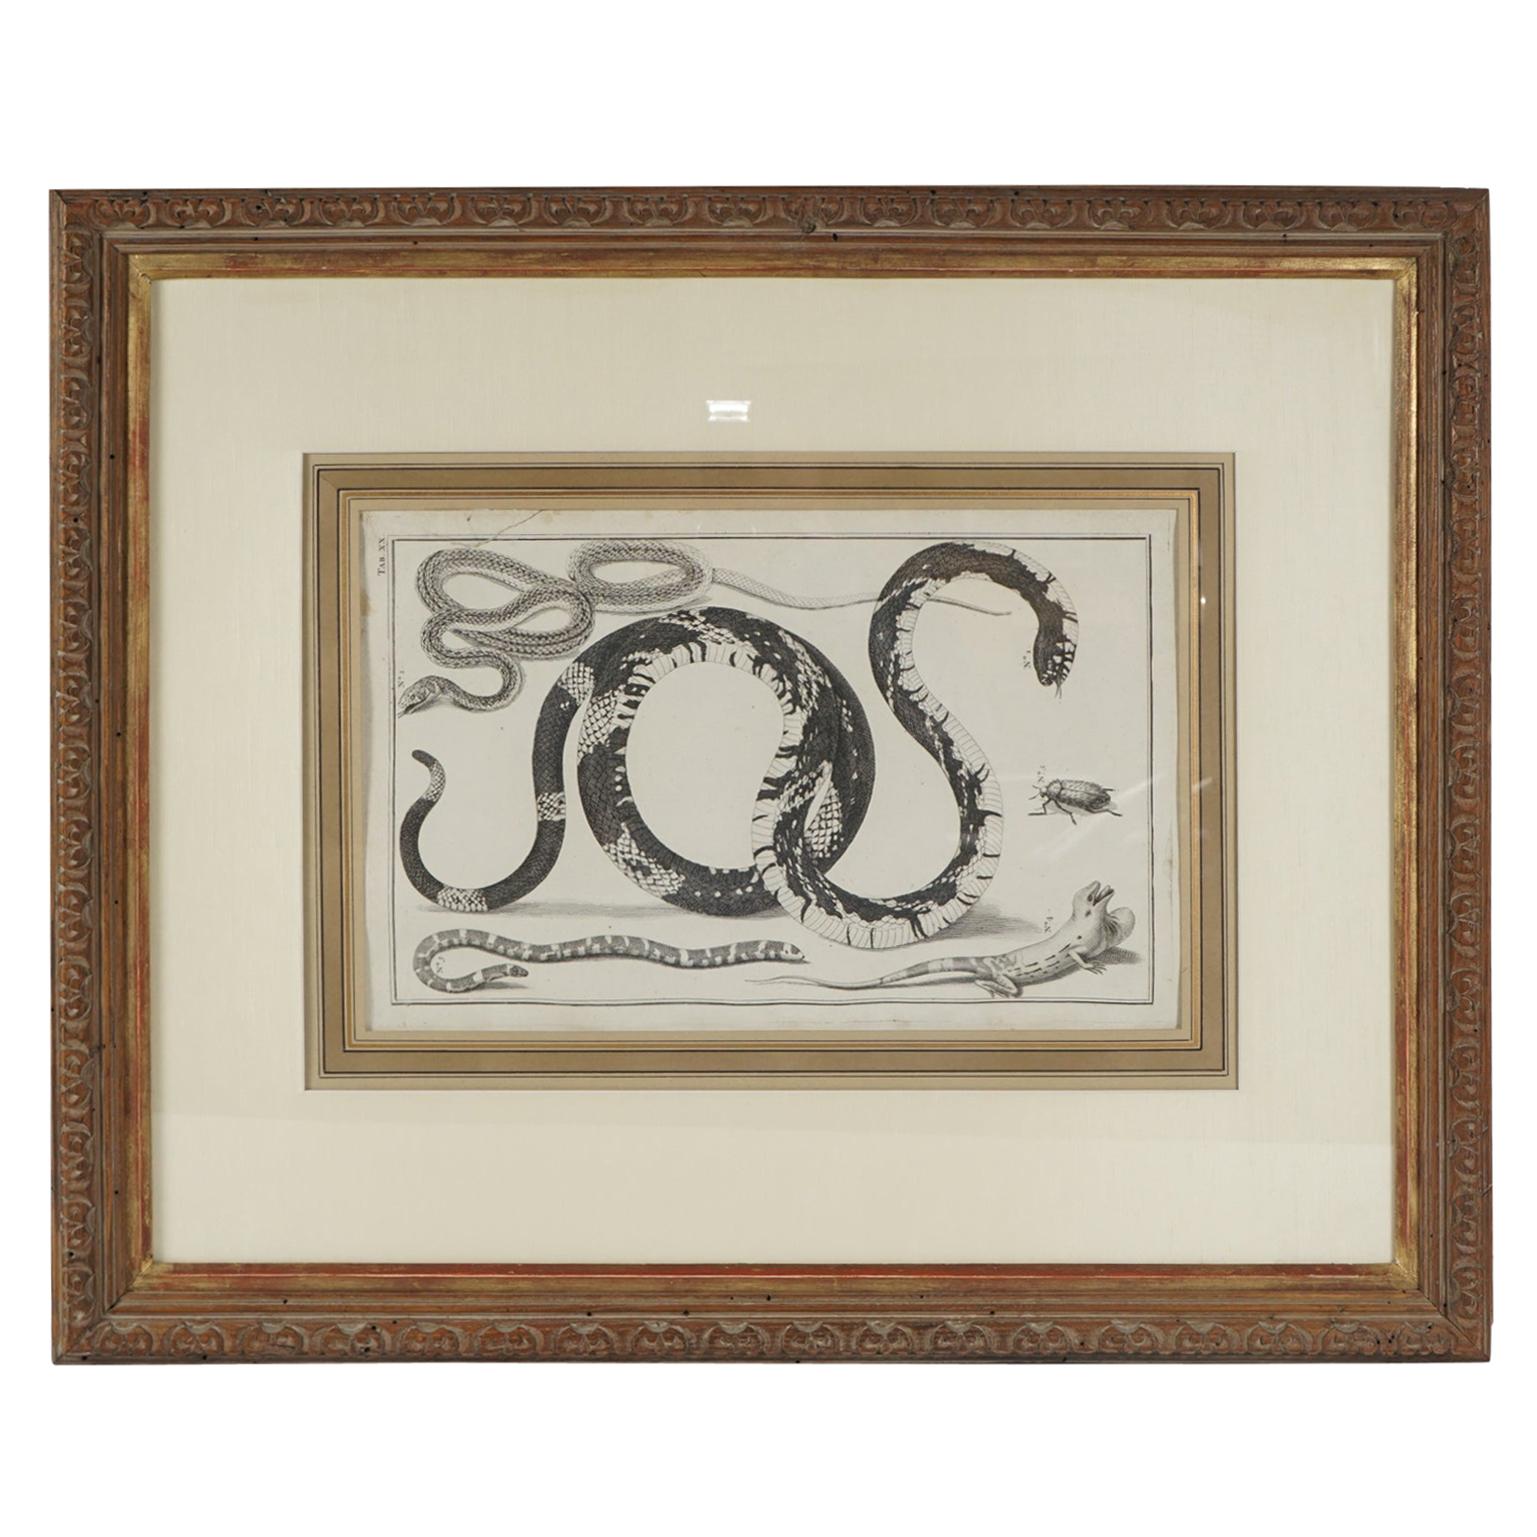 Four Framed Early 19th Century Large Folio Engravings of Lizards, Snakes & Bats For Sale